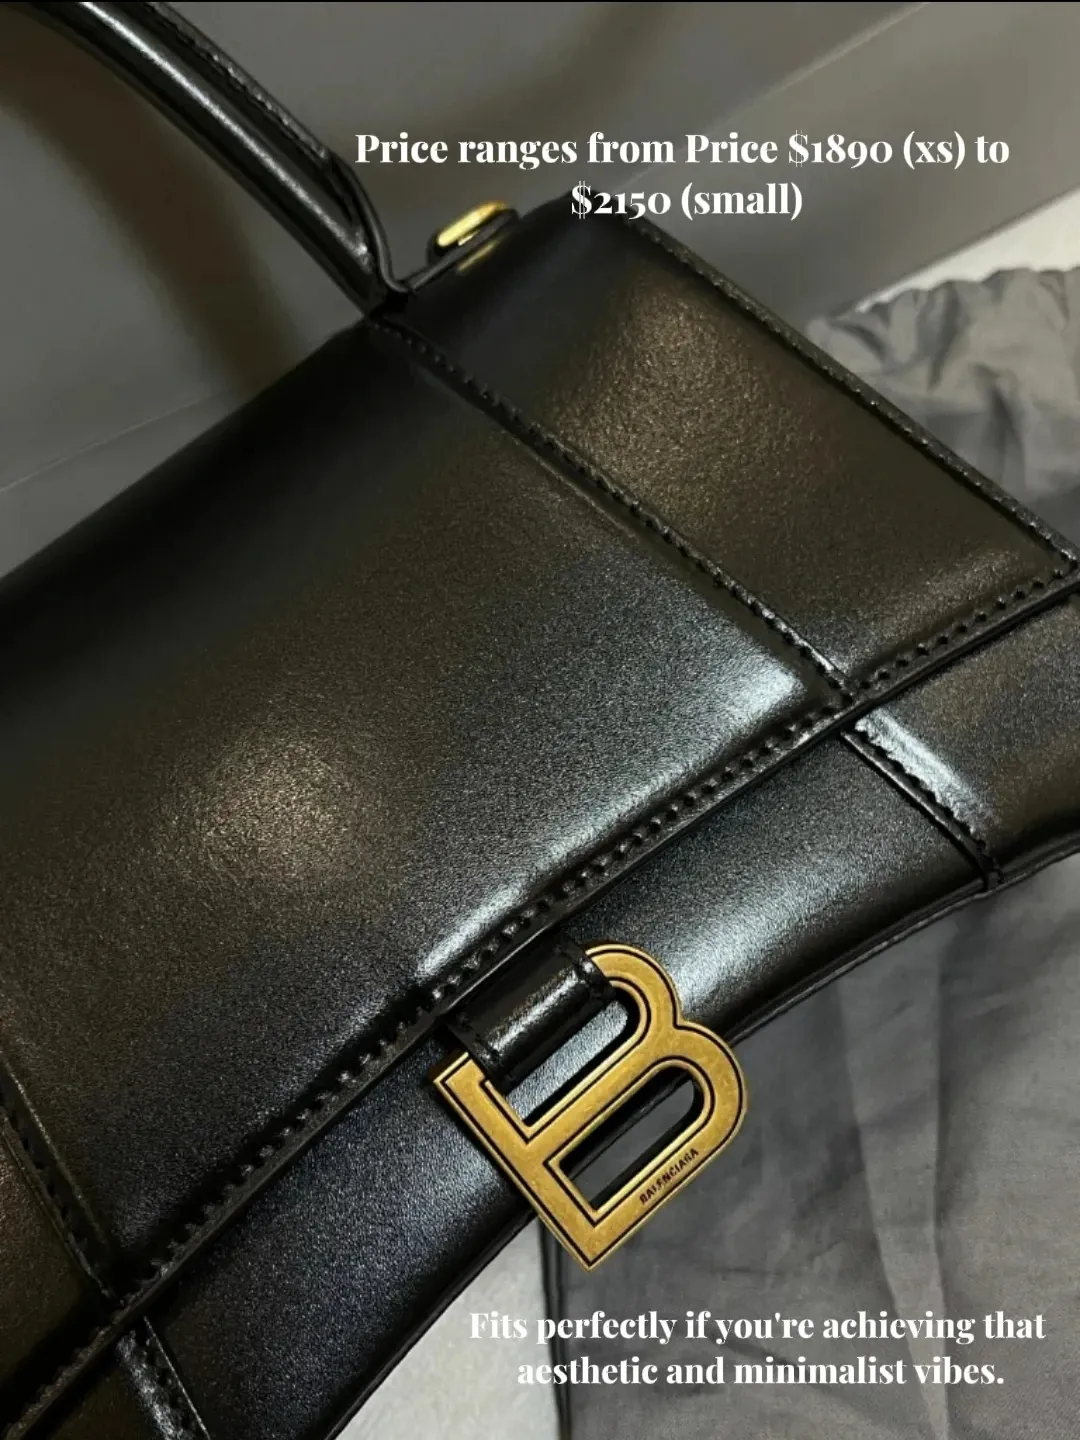 BALENCIAGA HOURGLASS XS & SMALL UNBOXING AND COMPARISON 